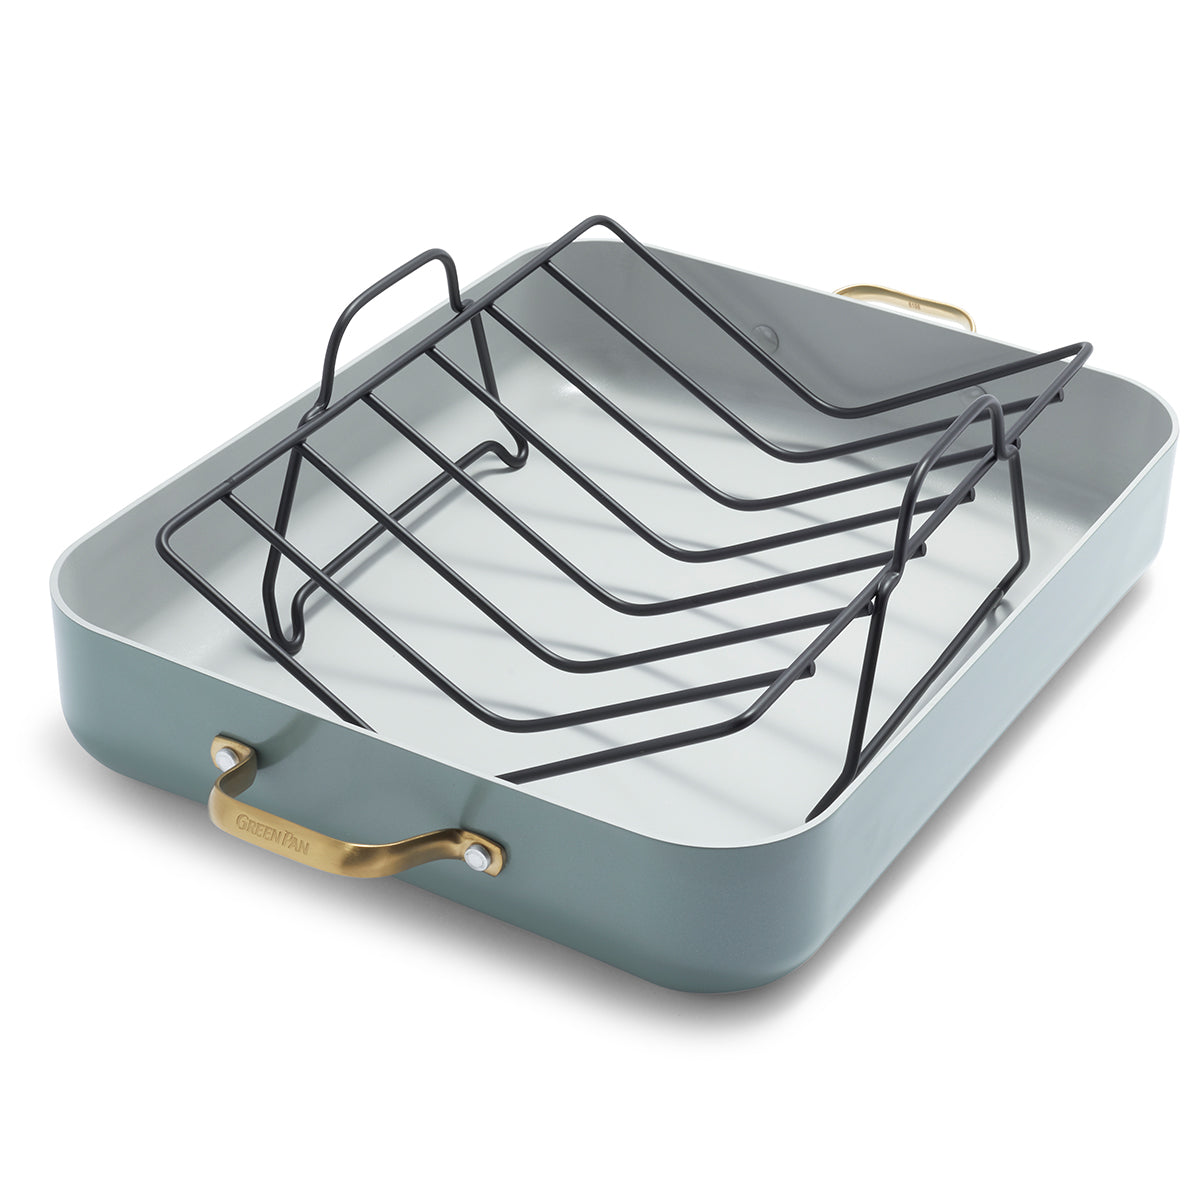 Chatham Ceramic Nonstick Roaster with Rack